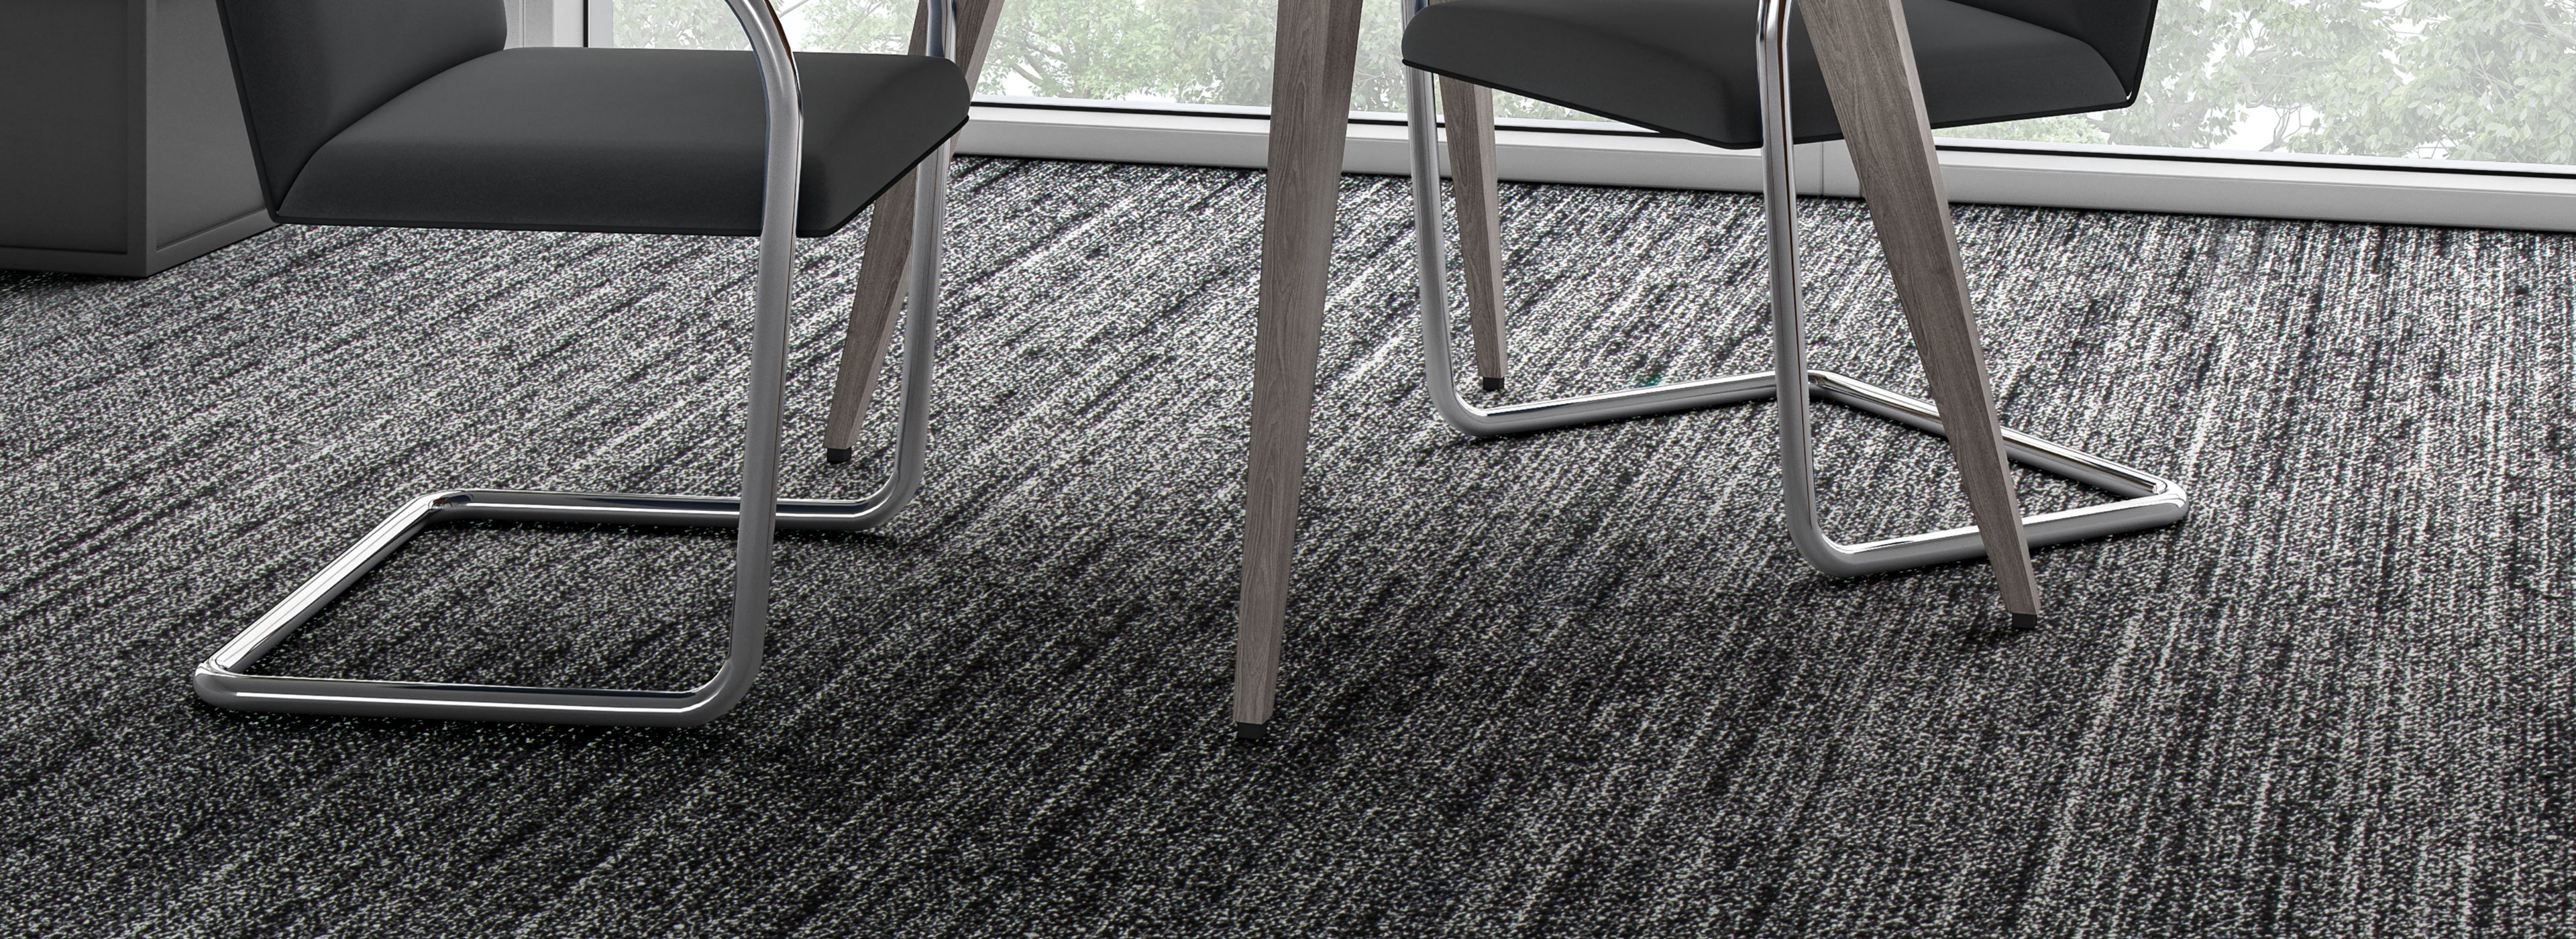 image Interface WW870 plank carpet tile shown with small table and chairs numéro 1